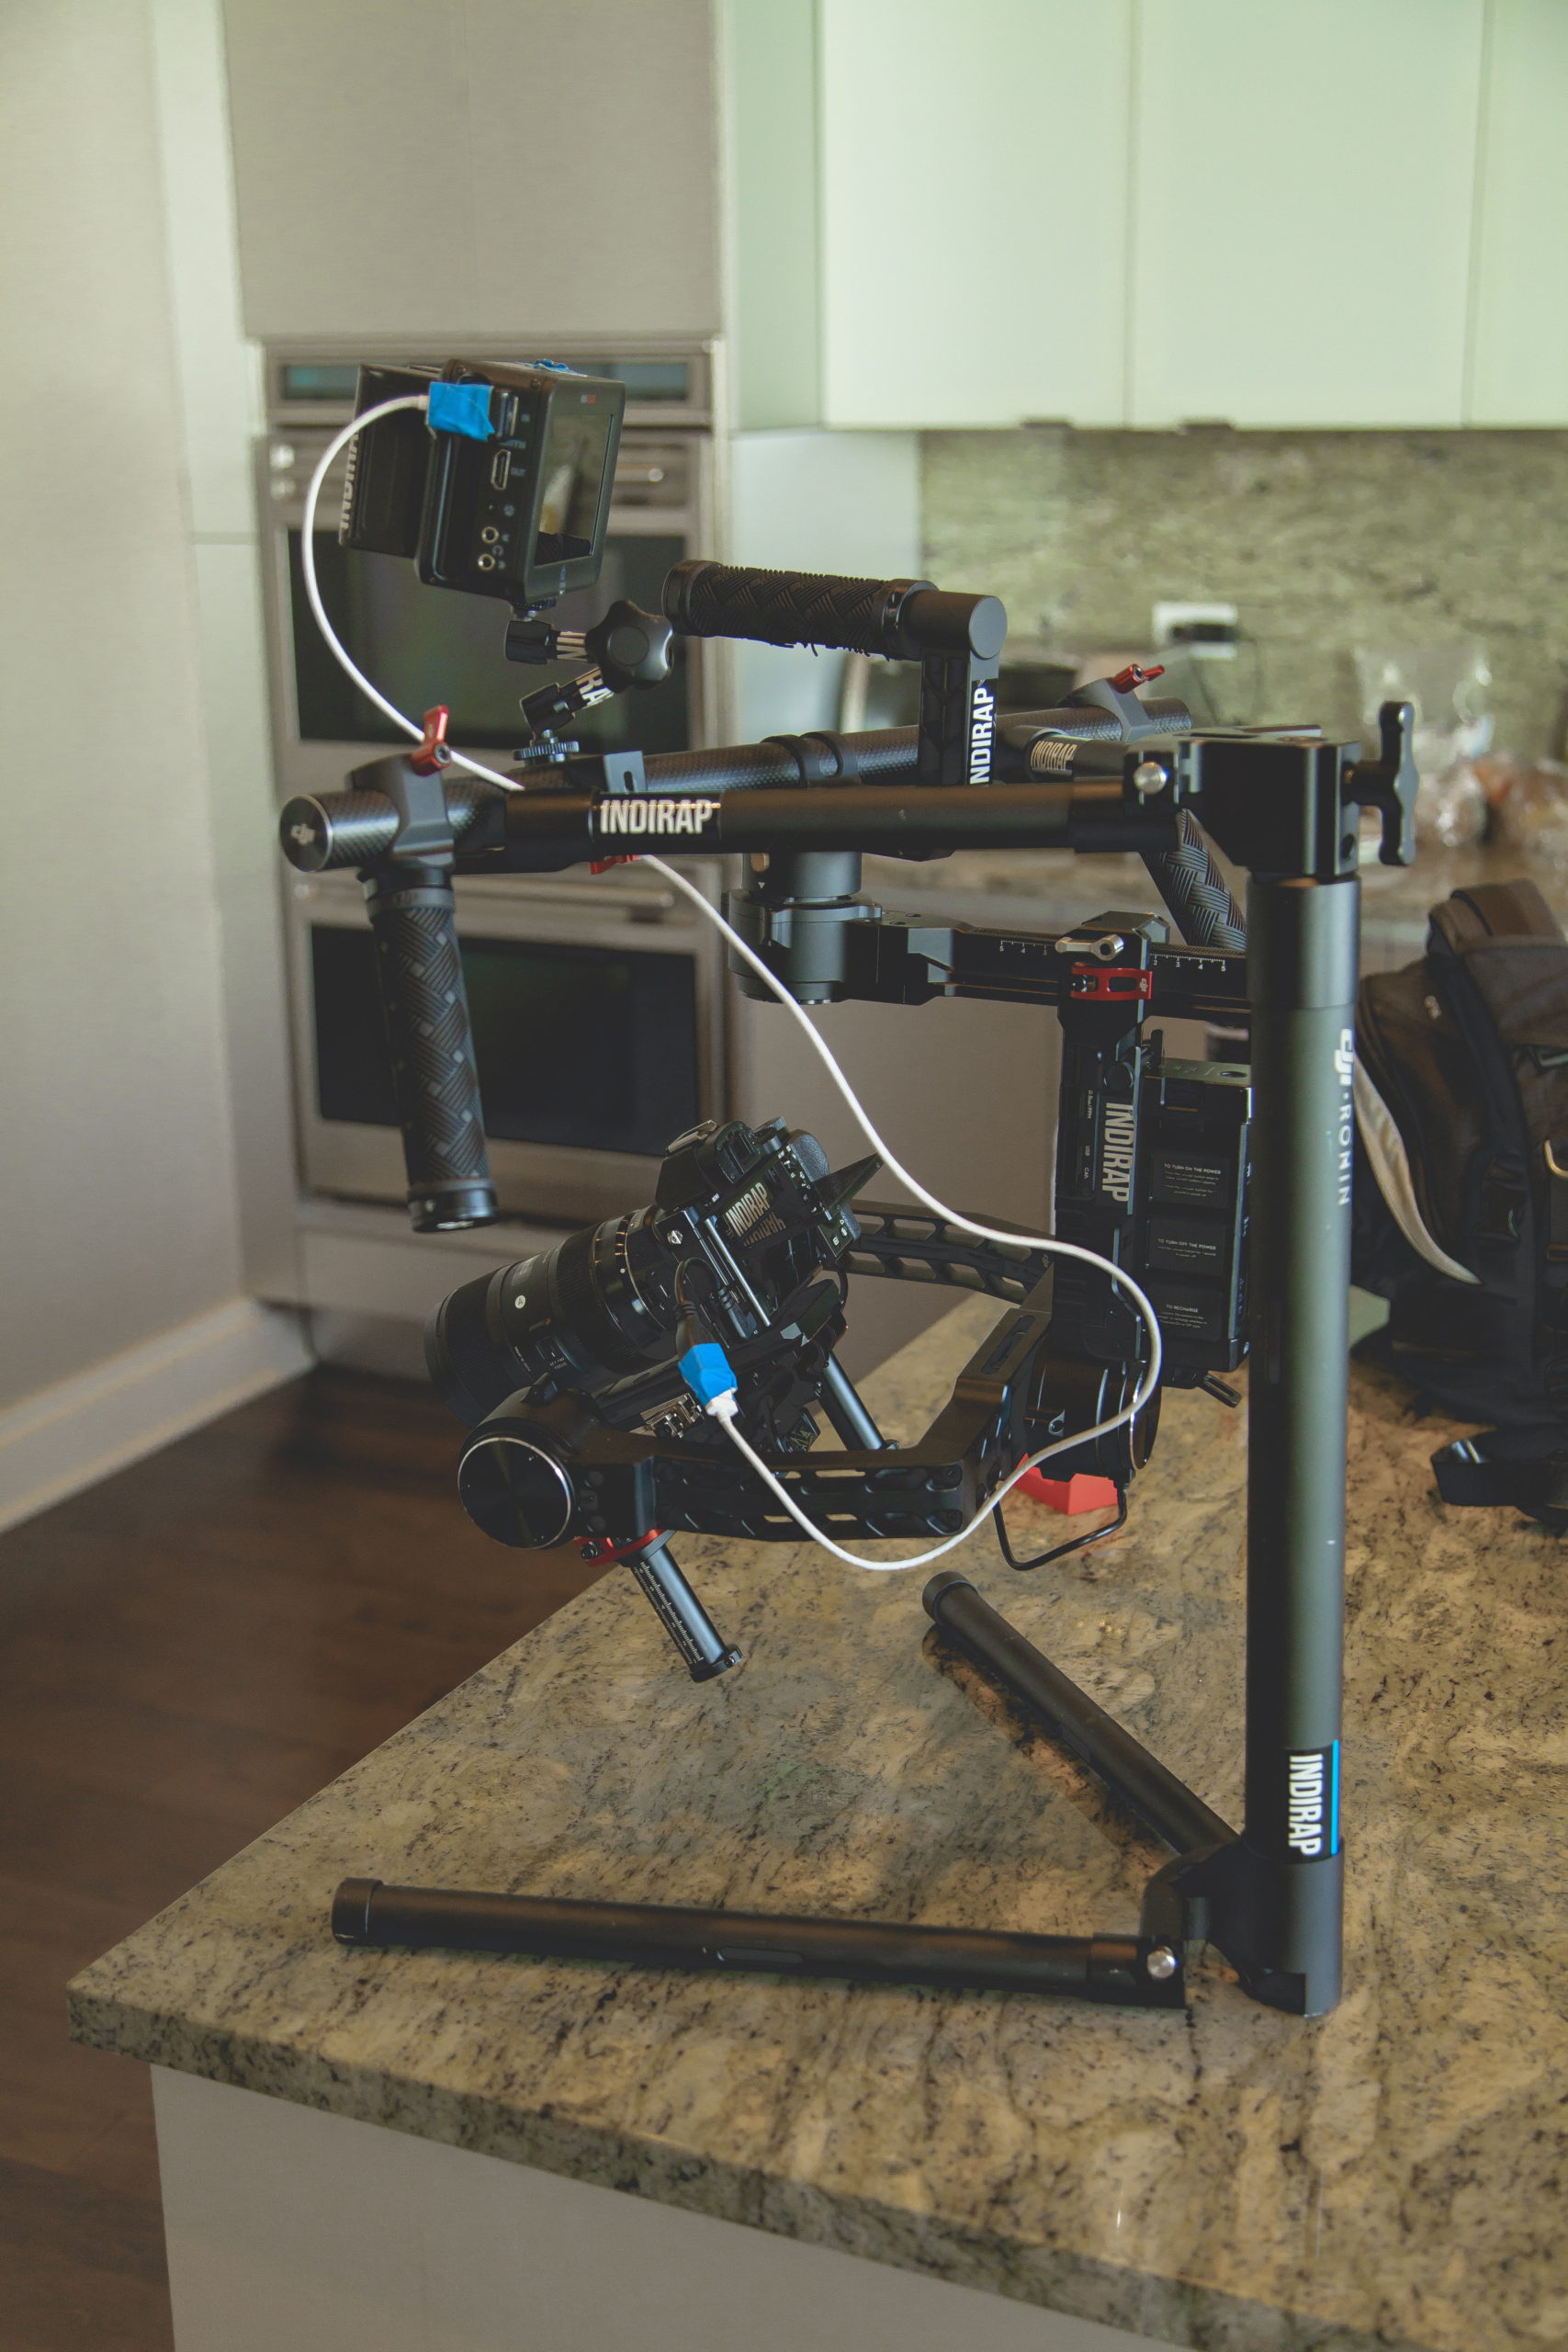 Real Estate Videography Pricing: What to Expect